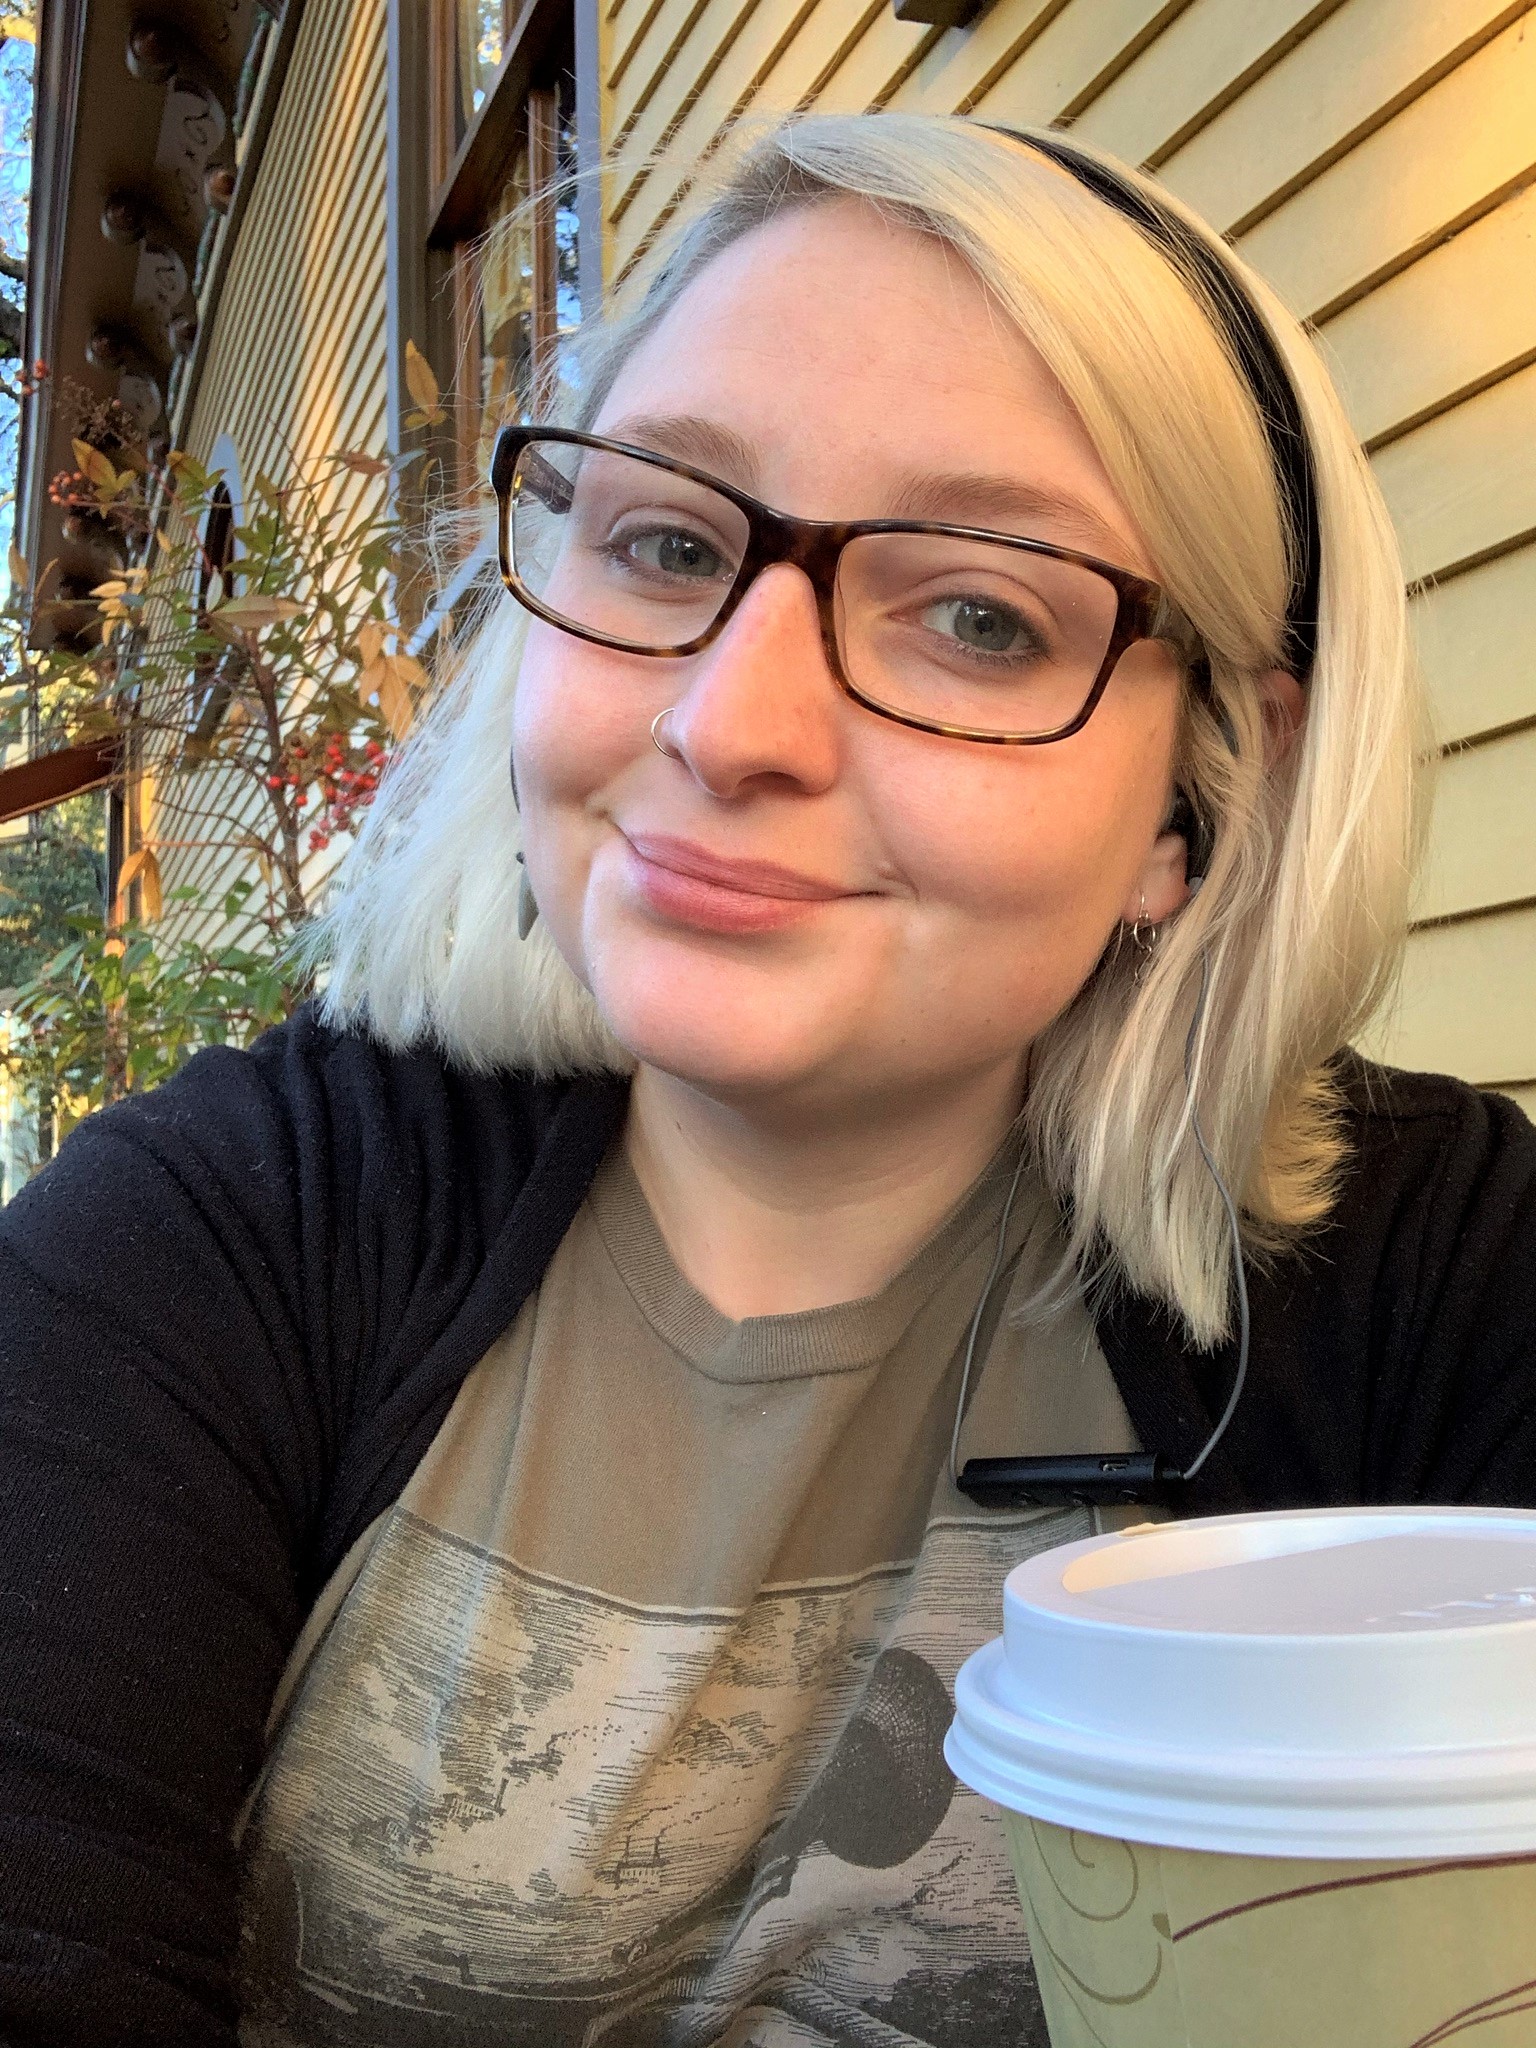 Shannon Dade sits with a cup of coffee in front of a yellow building